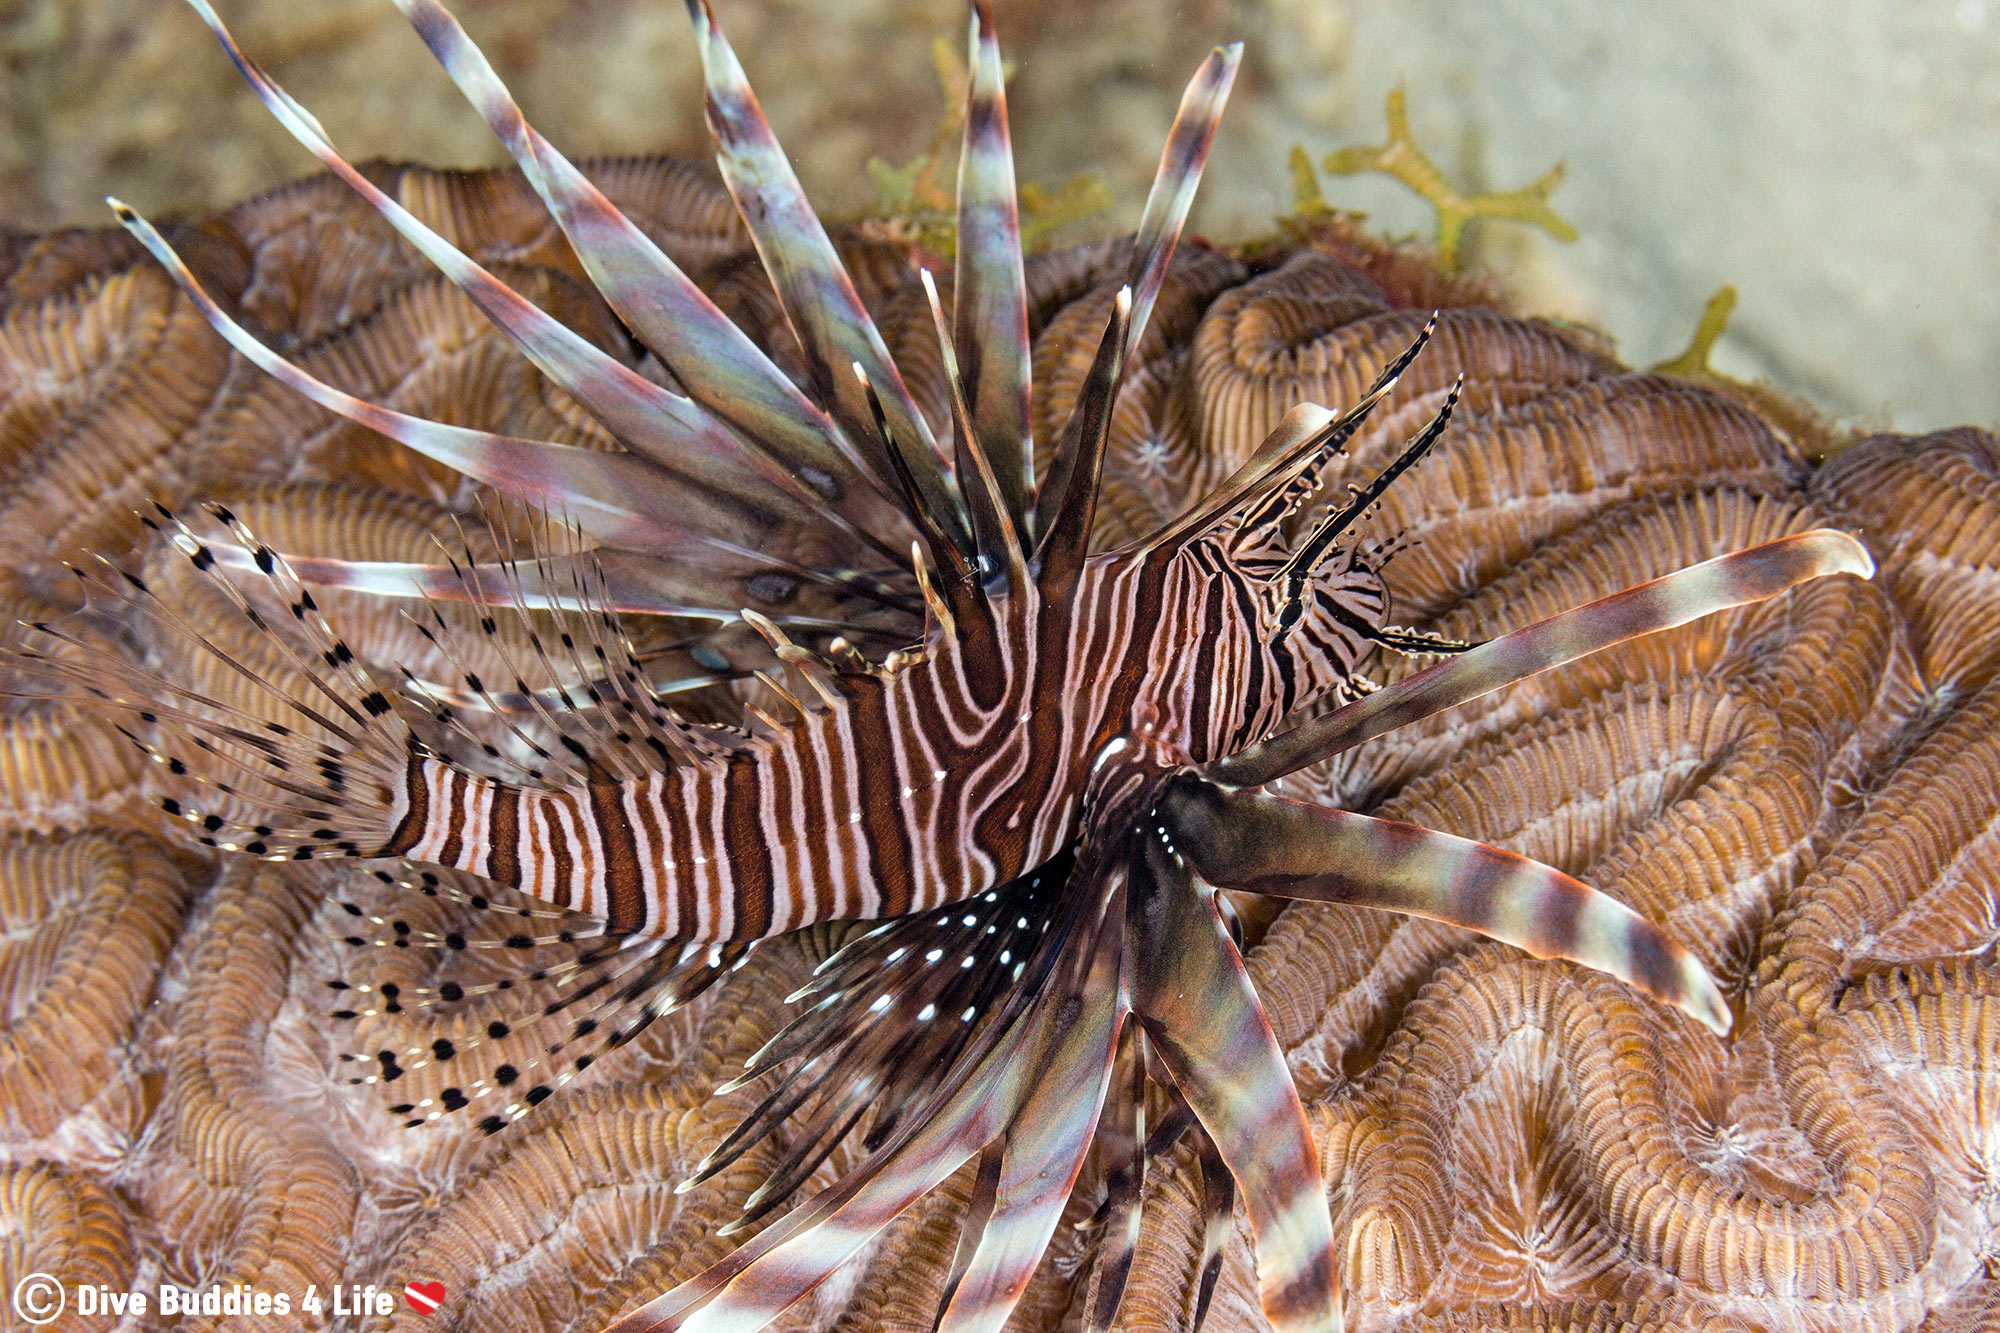 An Invasive Lionfish In The Caribbean Sea, Bonaire, Physical Pollution